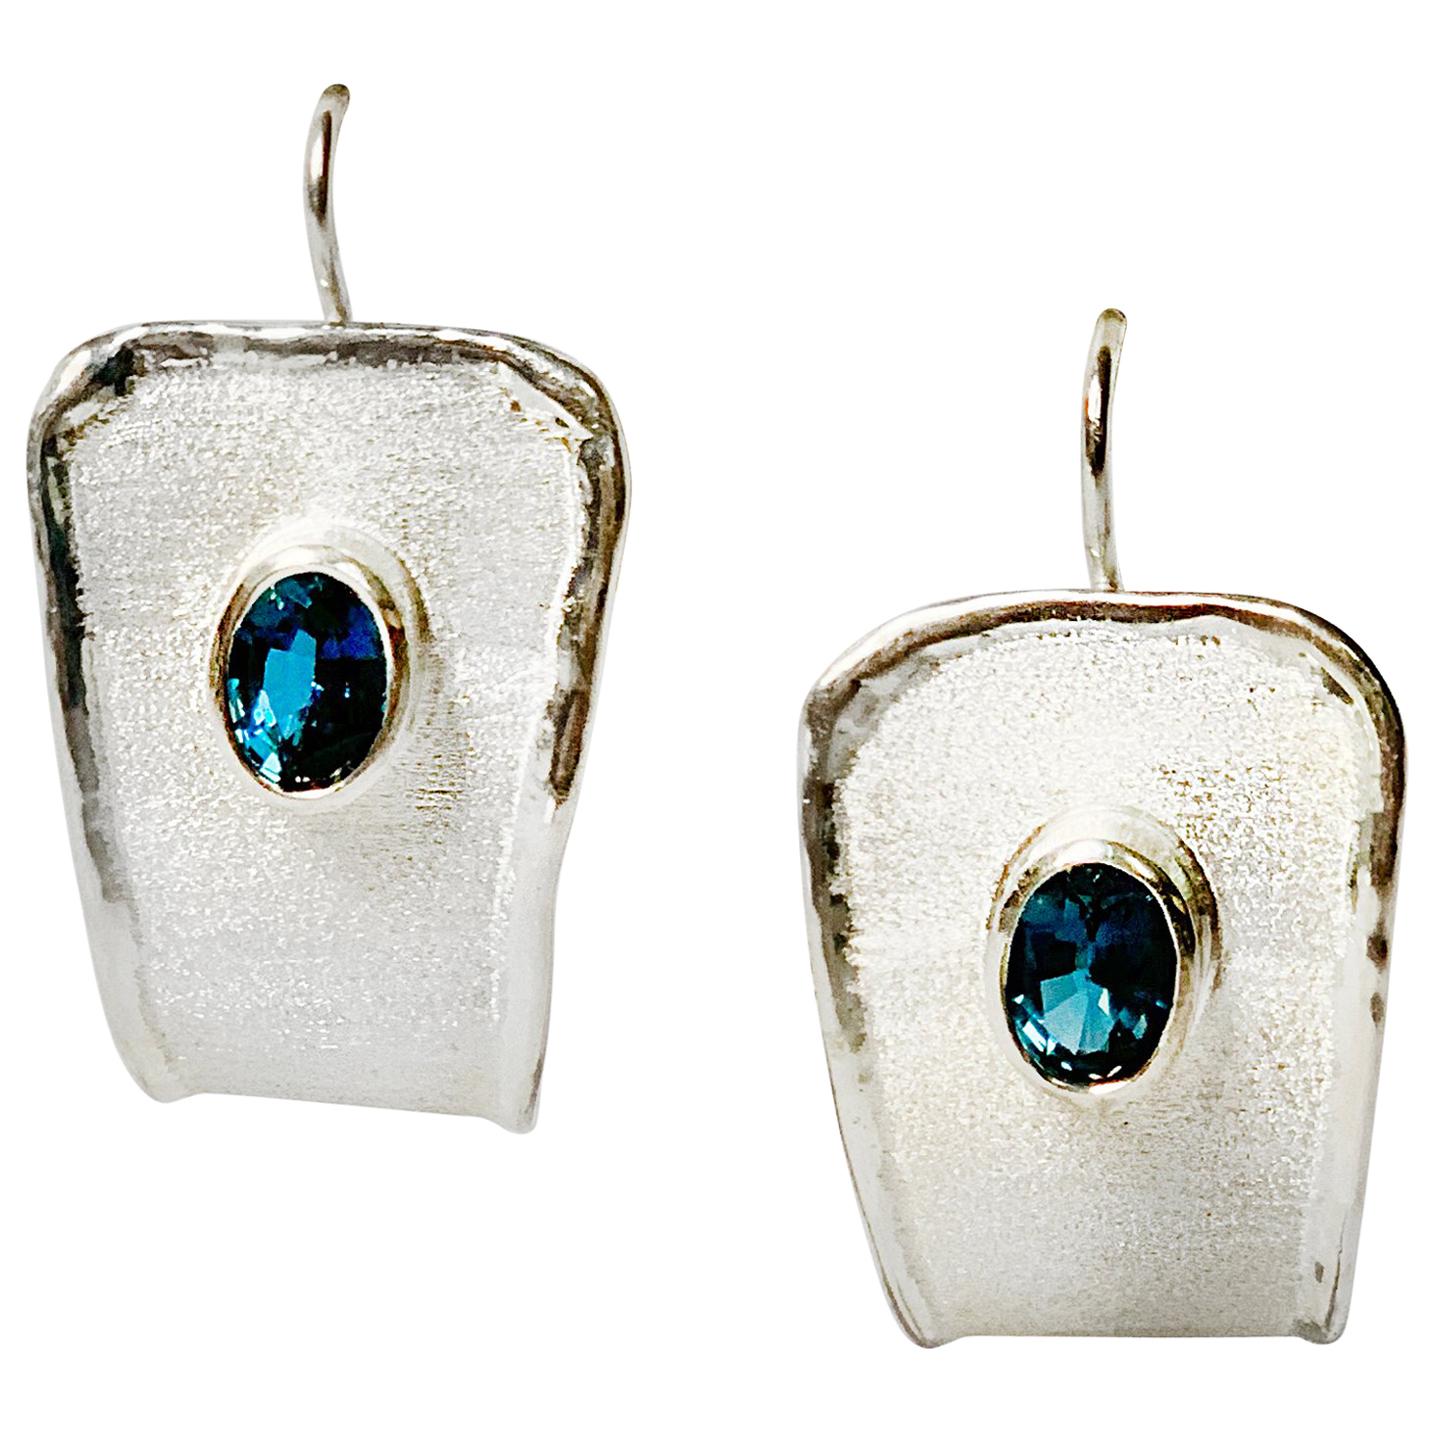 Yianni Creations Ammos Collection 100% Handmade Artisan Dangle Earrings from Fine Silver. Each gorgeous earring features a 1.20 Carat Oval Cut natural London Blue Topaz complemented by unique techniques of craftsmanship - brushed texture and